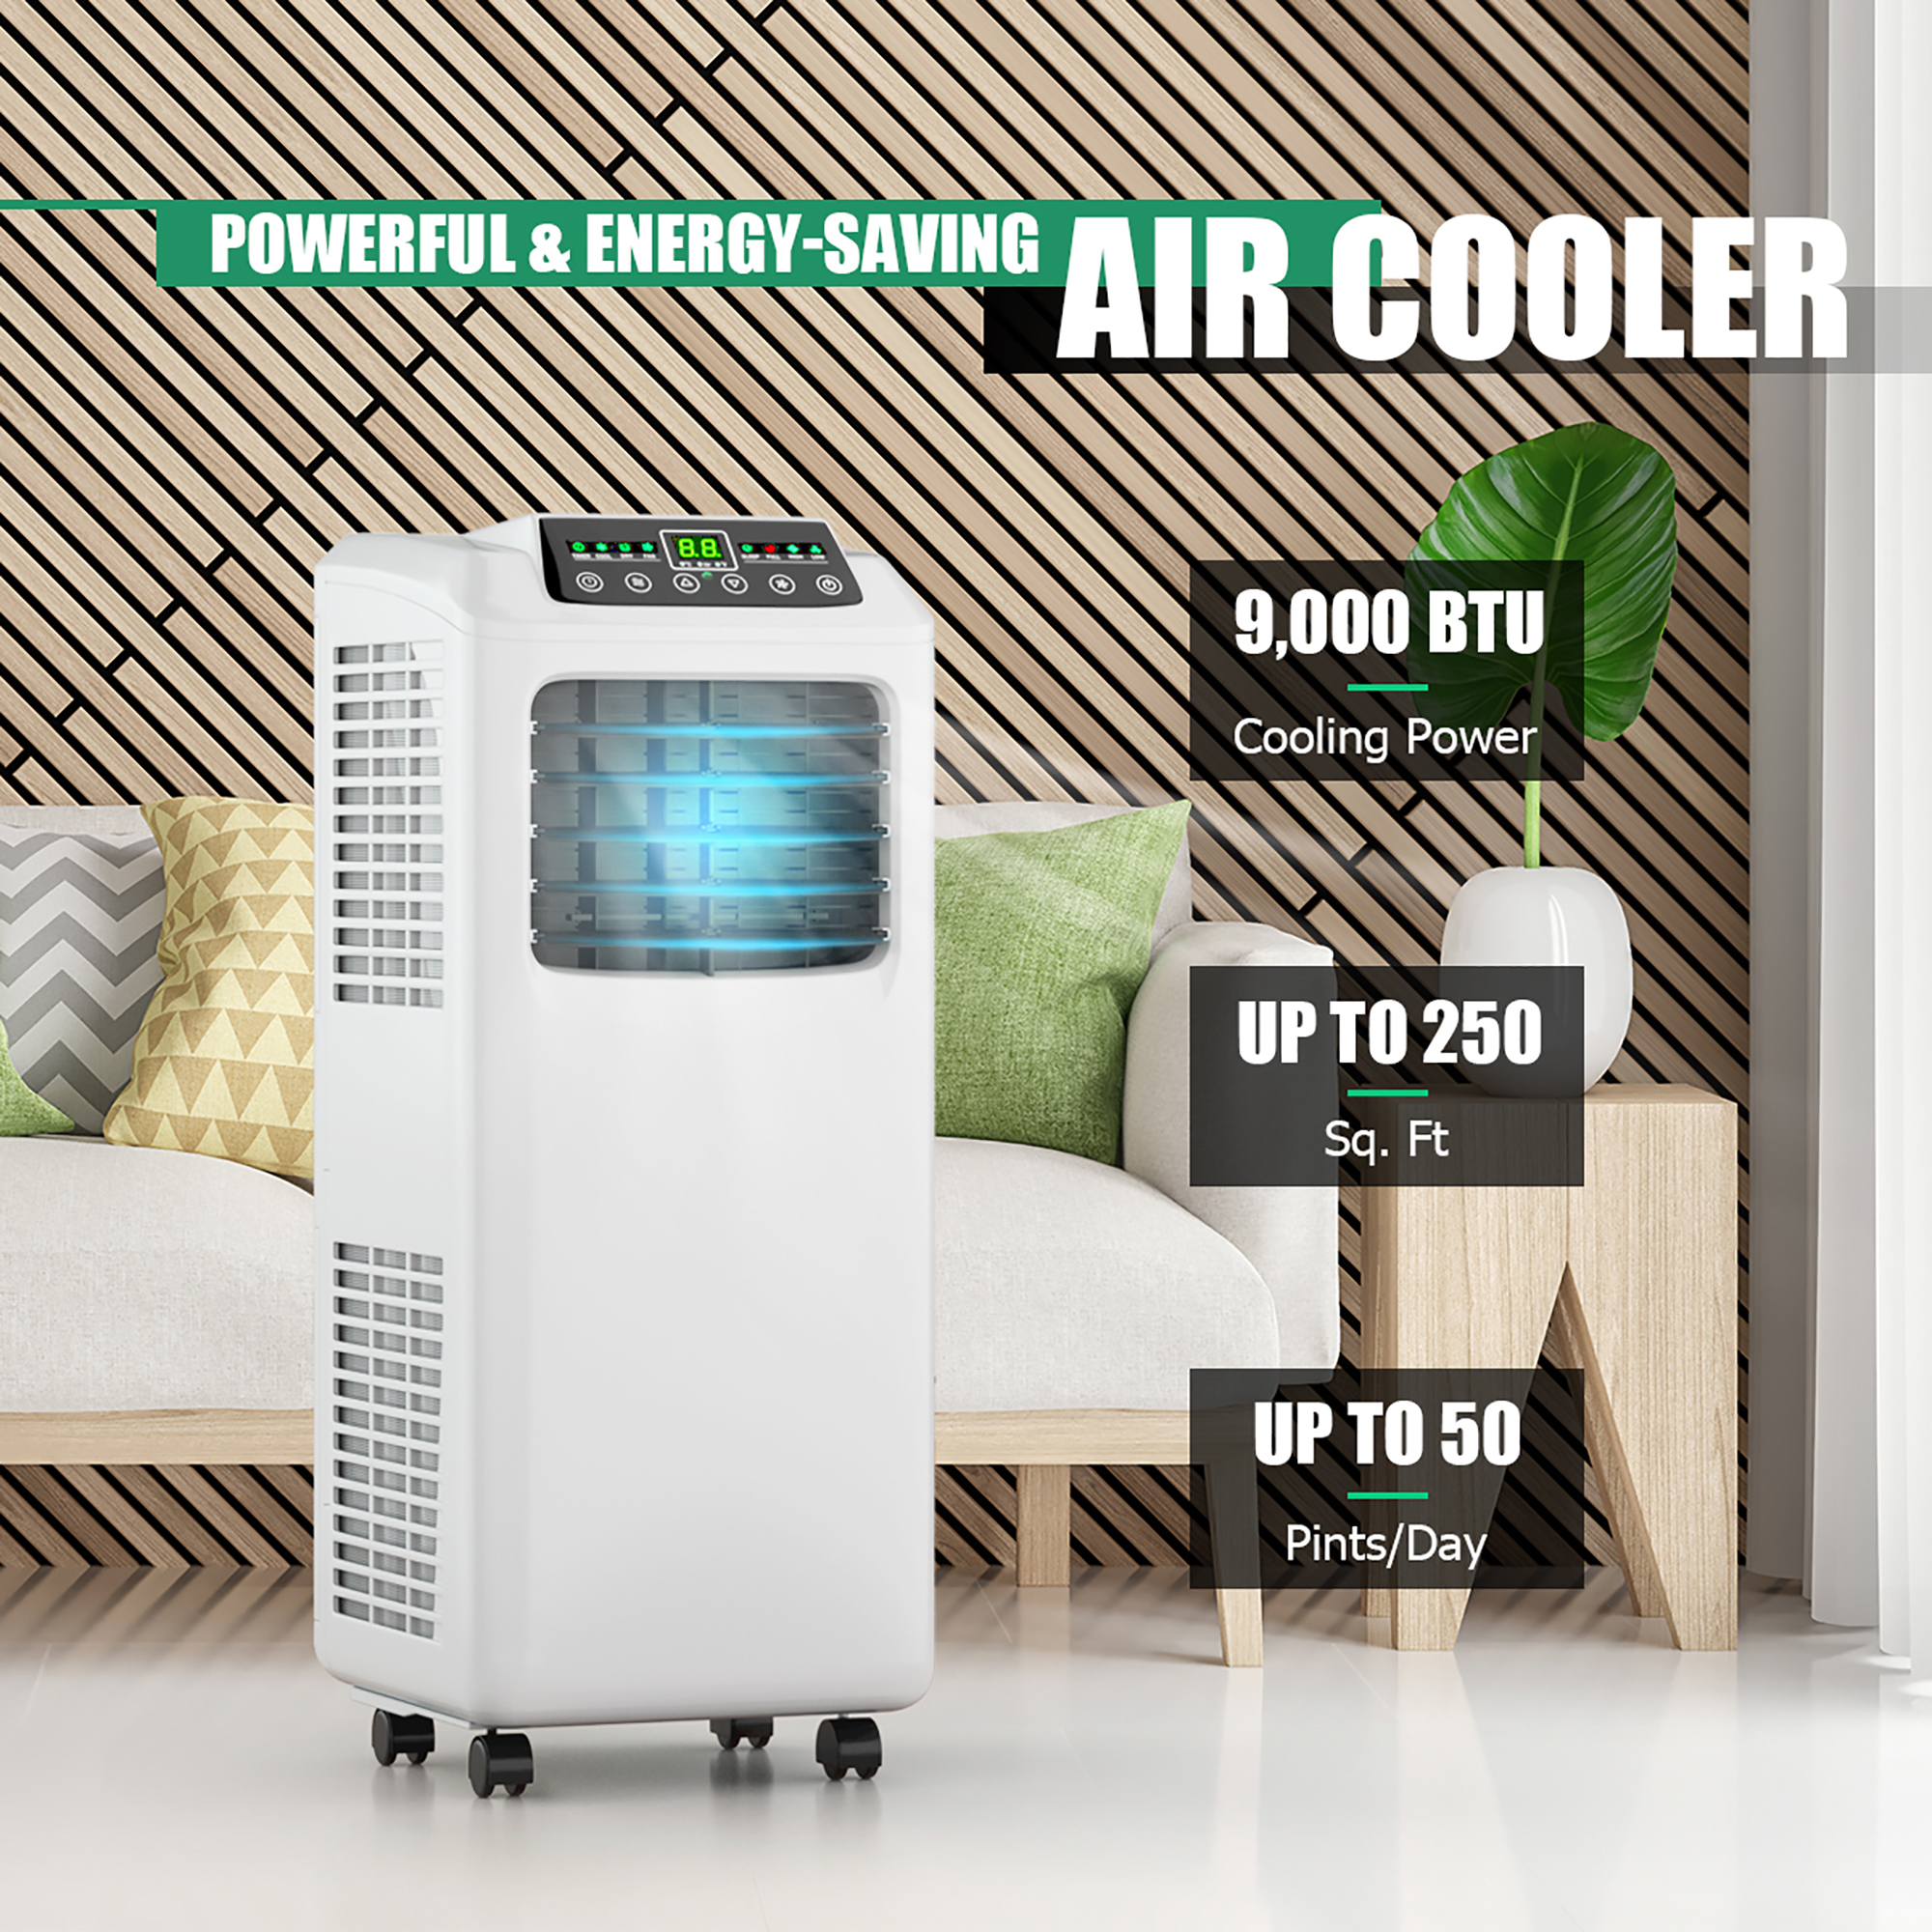 Costway 5500 BTU (9000 BTU ASHRAE) 3-in-1 Portable Air Conditioner w/Built-in Dehumidifier and Window Kit - image 5 of 11